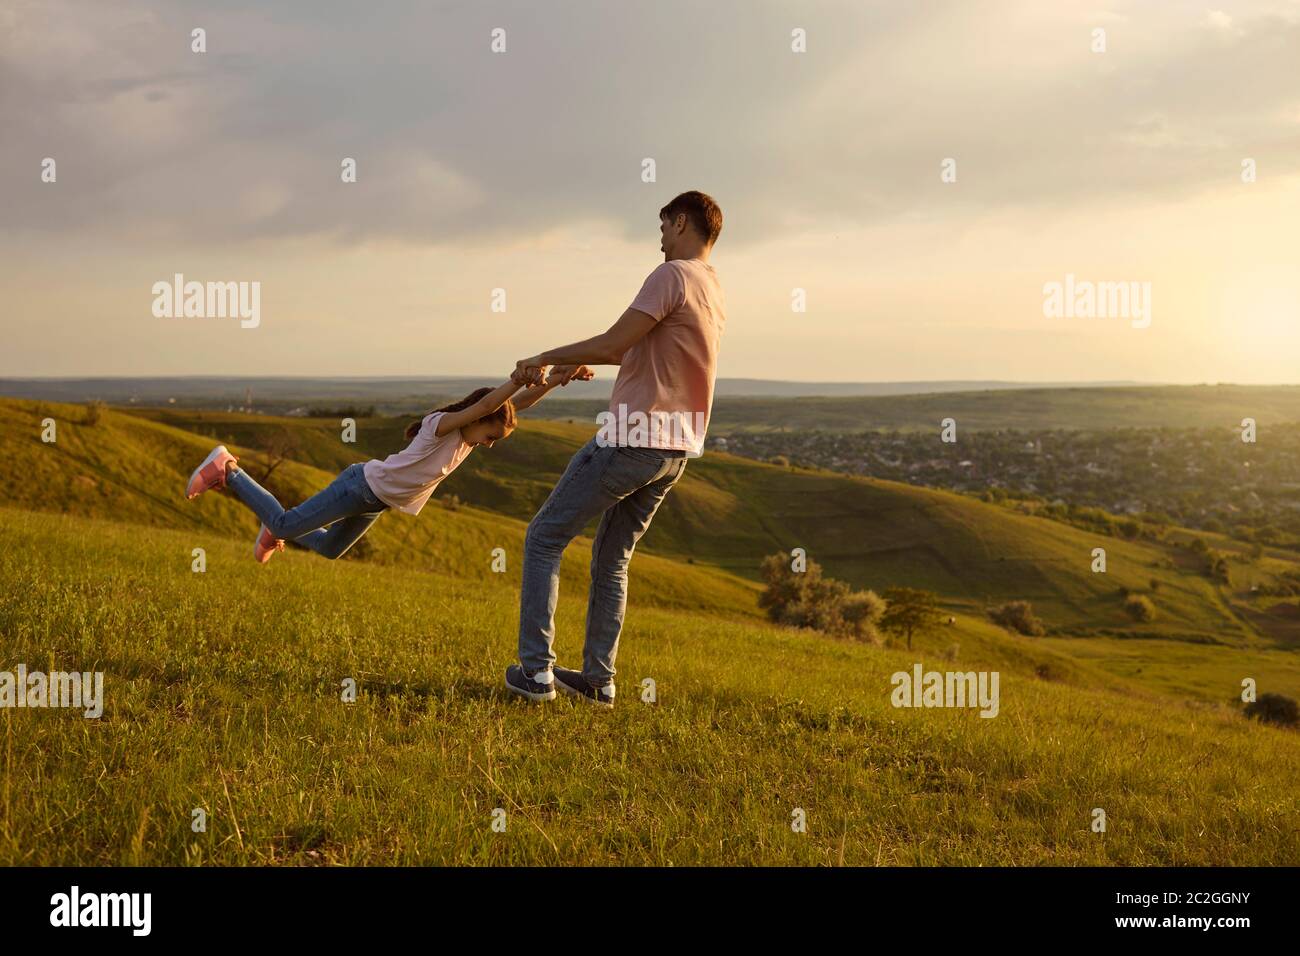 Young father playing game with his daughter in countryside at sunset, copy space. Dad spinning child in circles outdoors Stock Photo